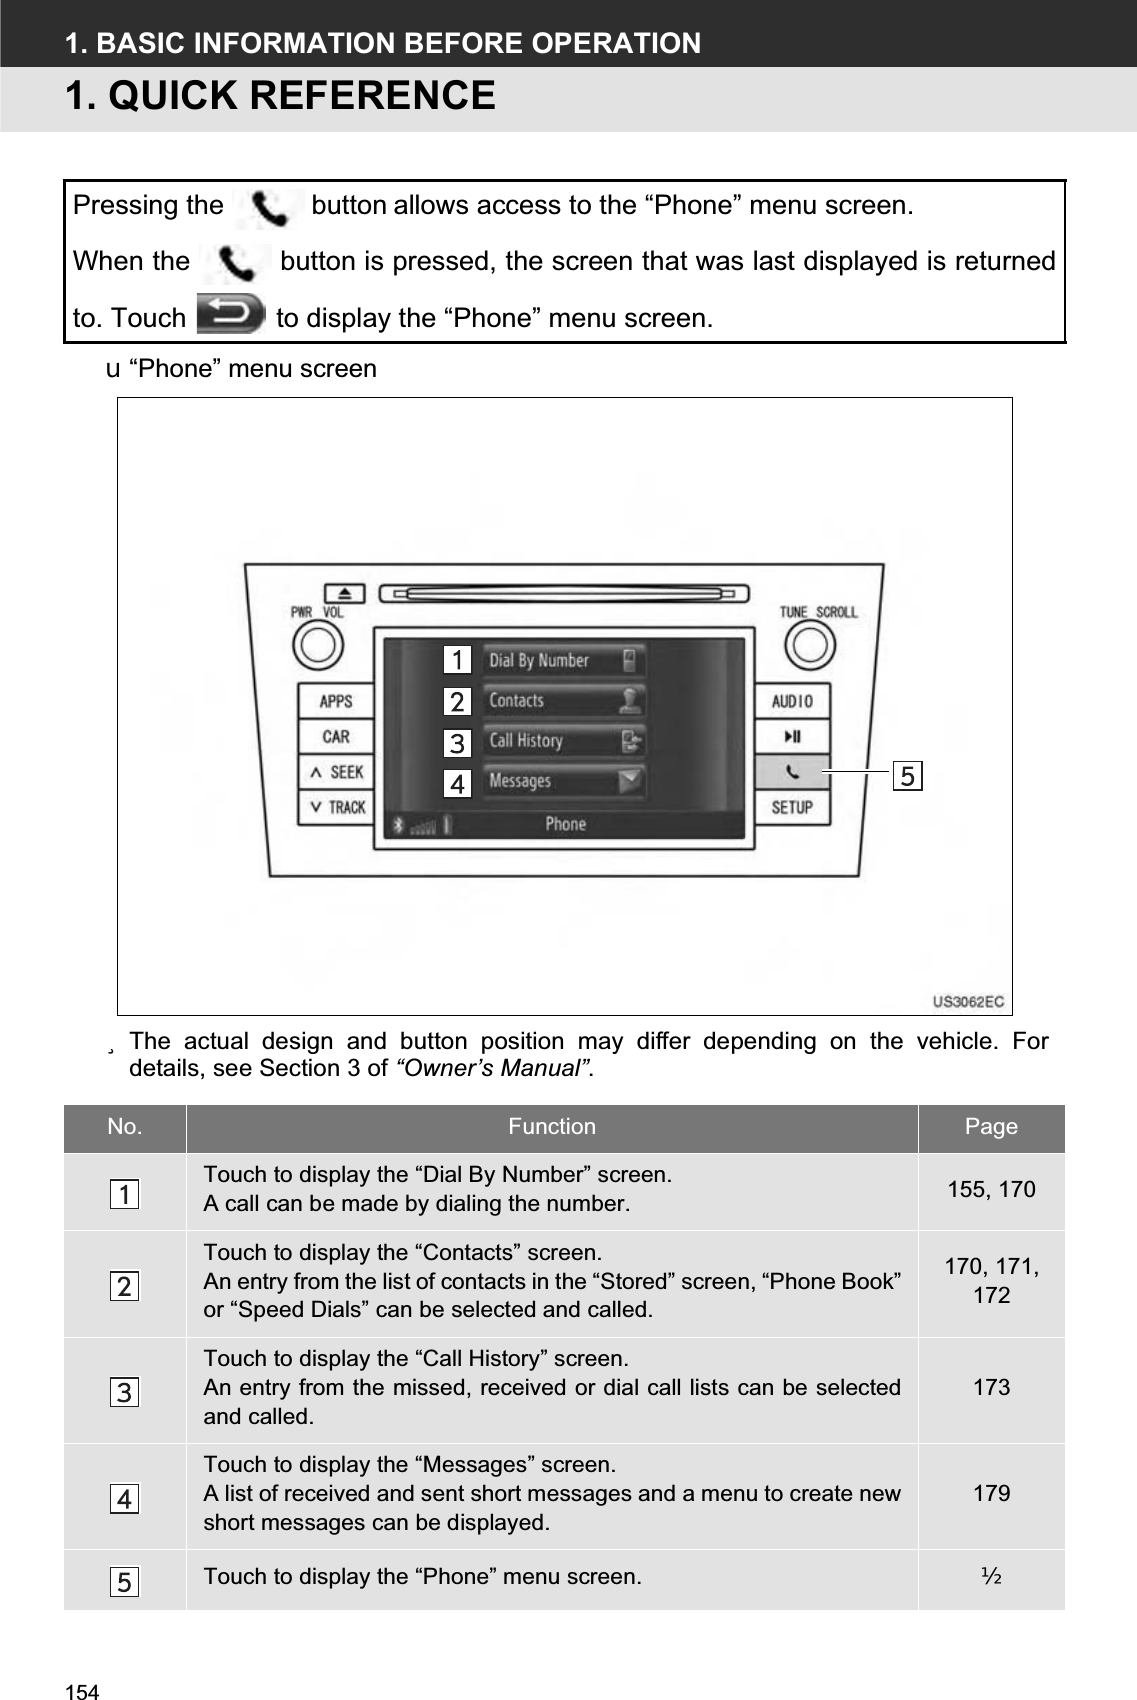 1541. BASIC INFORMATION BEFORE OPERATION1. QUICK REFERENCEX“Phone” menu screenzThe actual design and button position may differ depending on the vehicle. Fordetails, see Section 3 of “Owner’s Manual”.Pressing the  button allows access to the “Phone” menu screen.When the   button is pressed, the screen that was last displayed is returnedto. Touch   to display the “Phone” menu screen.No. Function PageTouch to display the “Dial By Number” screen.A call can be made by dialing the number. 155, 170Touch to display the “Contacts” screen.An entry from the list of contacts in the “Stored” screen, “Phone Book”or “Speed Dials” can be selected and called.170, 171, 172Touch to display the “Call History” screen.An entry from the missed, received or dial call lists can be selectedand called.173Touch to display the “Messages” screen.A list of received and sent short messages and a menu to create newshort messages can be displayed.179Touch to display the “Phone” menu screen. 